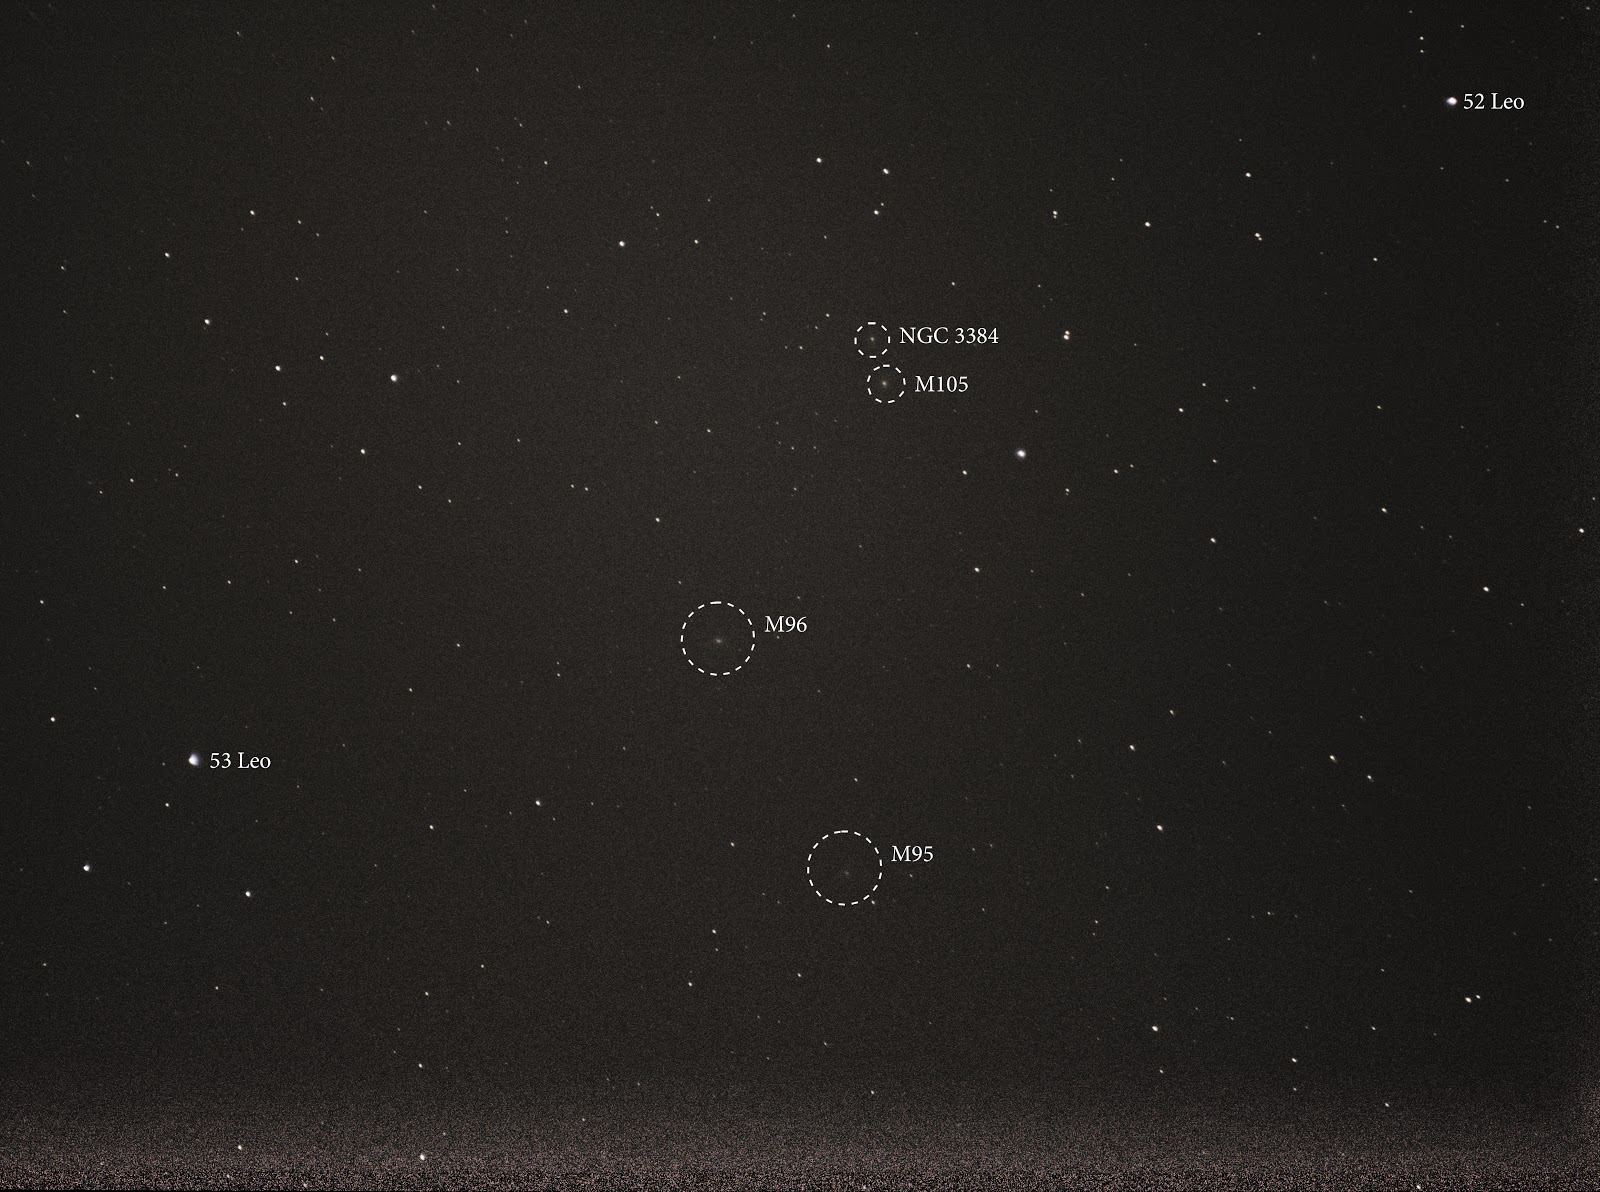 Canon T5i M96, M95, M105, and NGC 3384